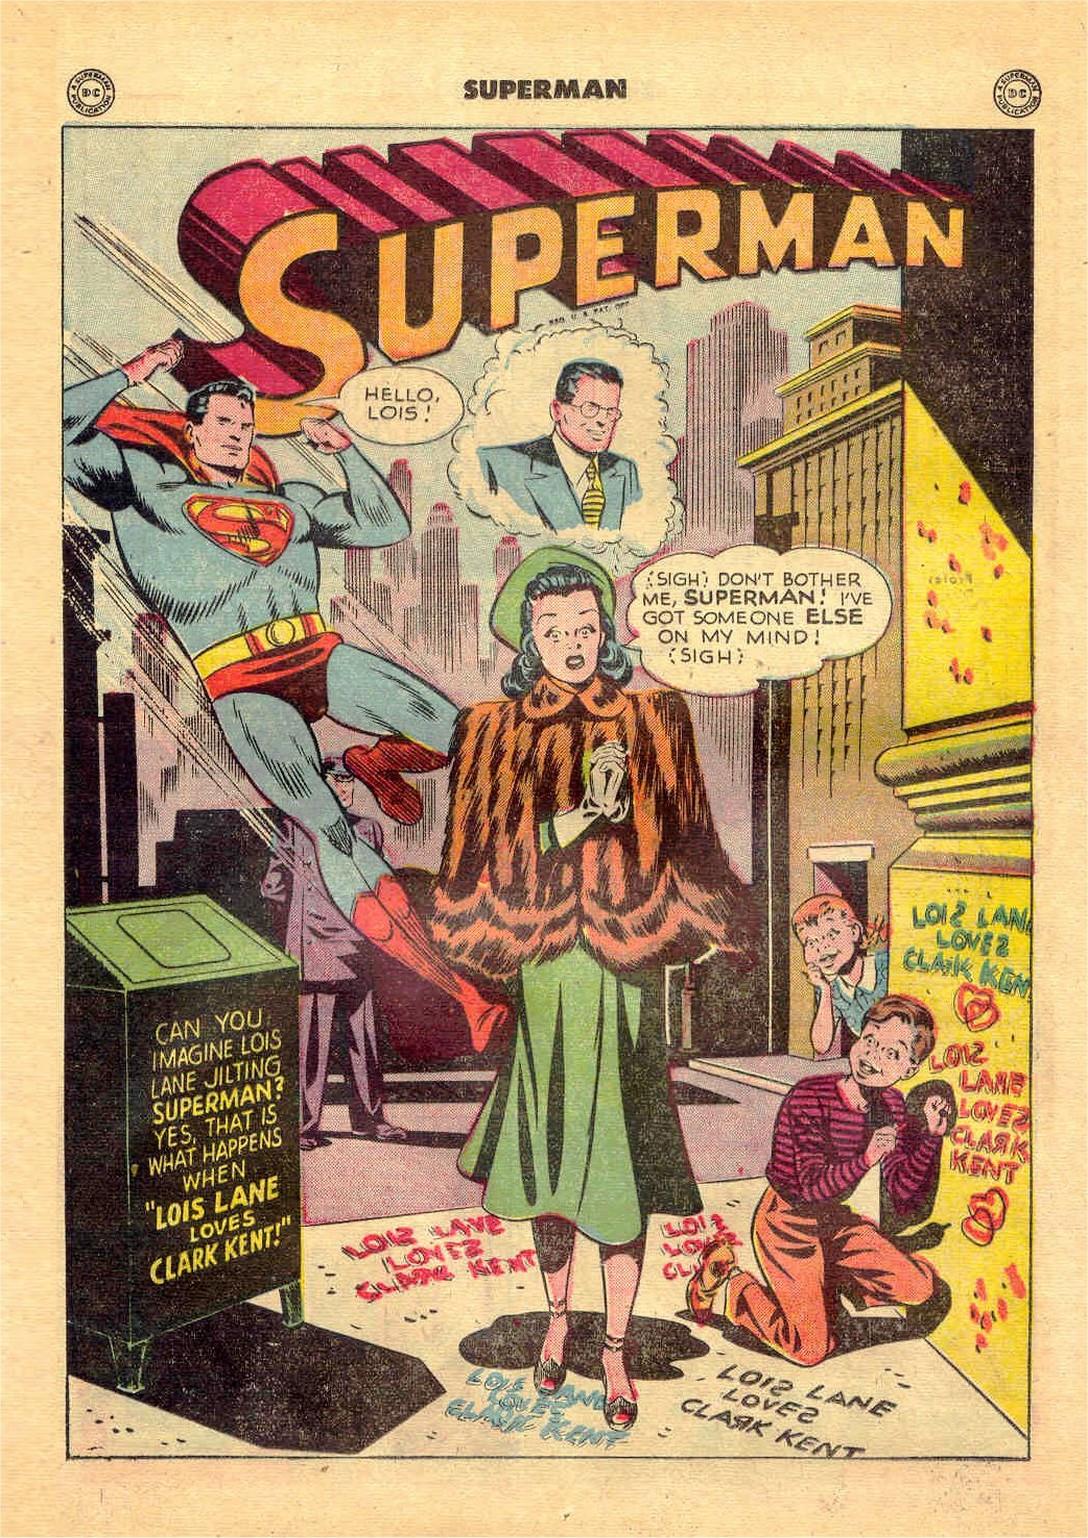 Superman in the Forties review